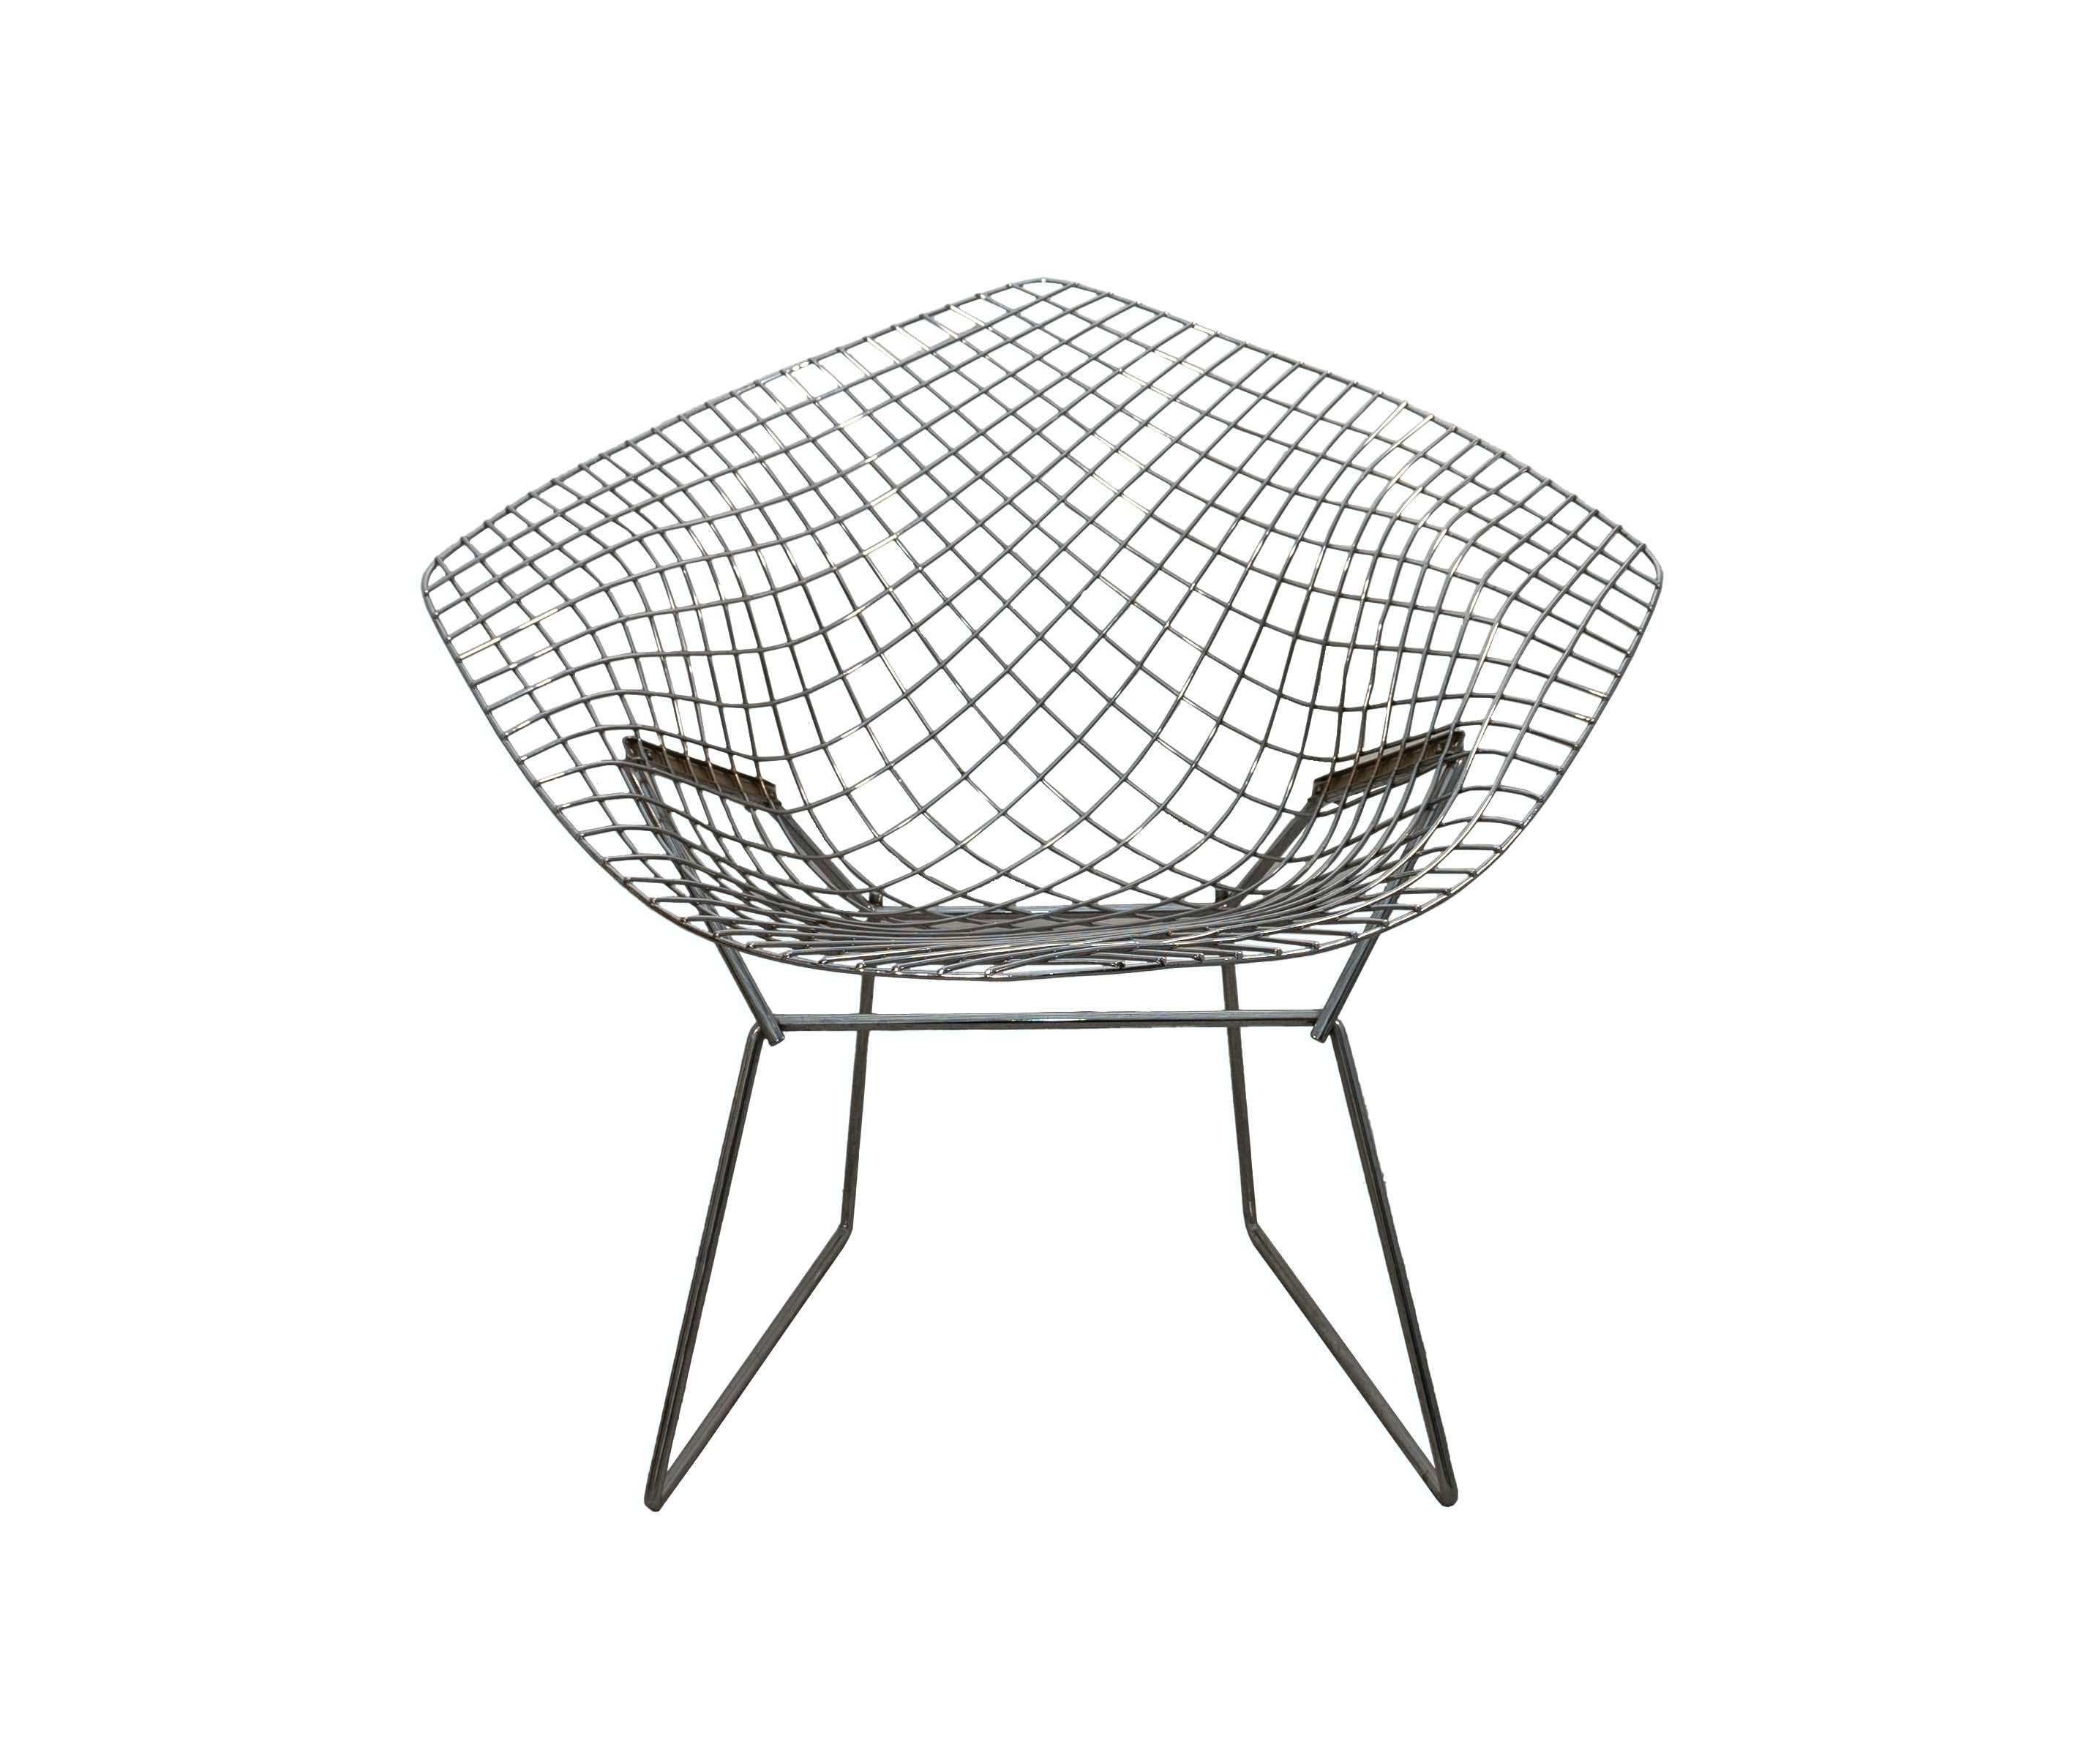 Discover sculptural sophistication with this Harry Bertoia for Knoll Wire Diamond Chair, a true Mid Century Modern gem. Its intricate and airy wire frame is a triumph of space-defying form and function, offering a spacious seat without overwhelming